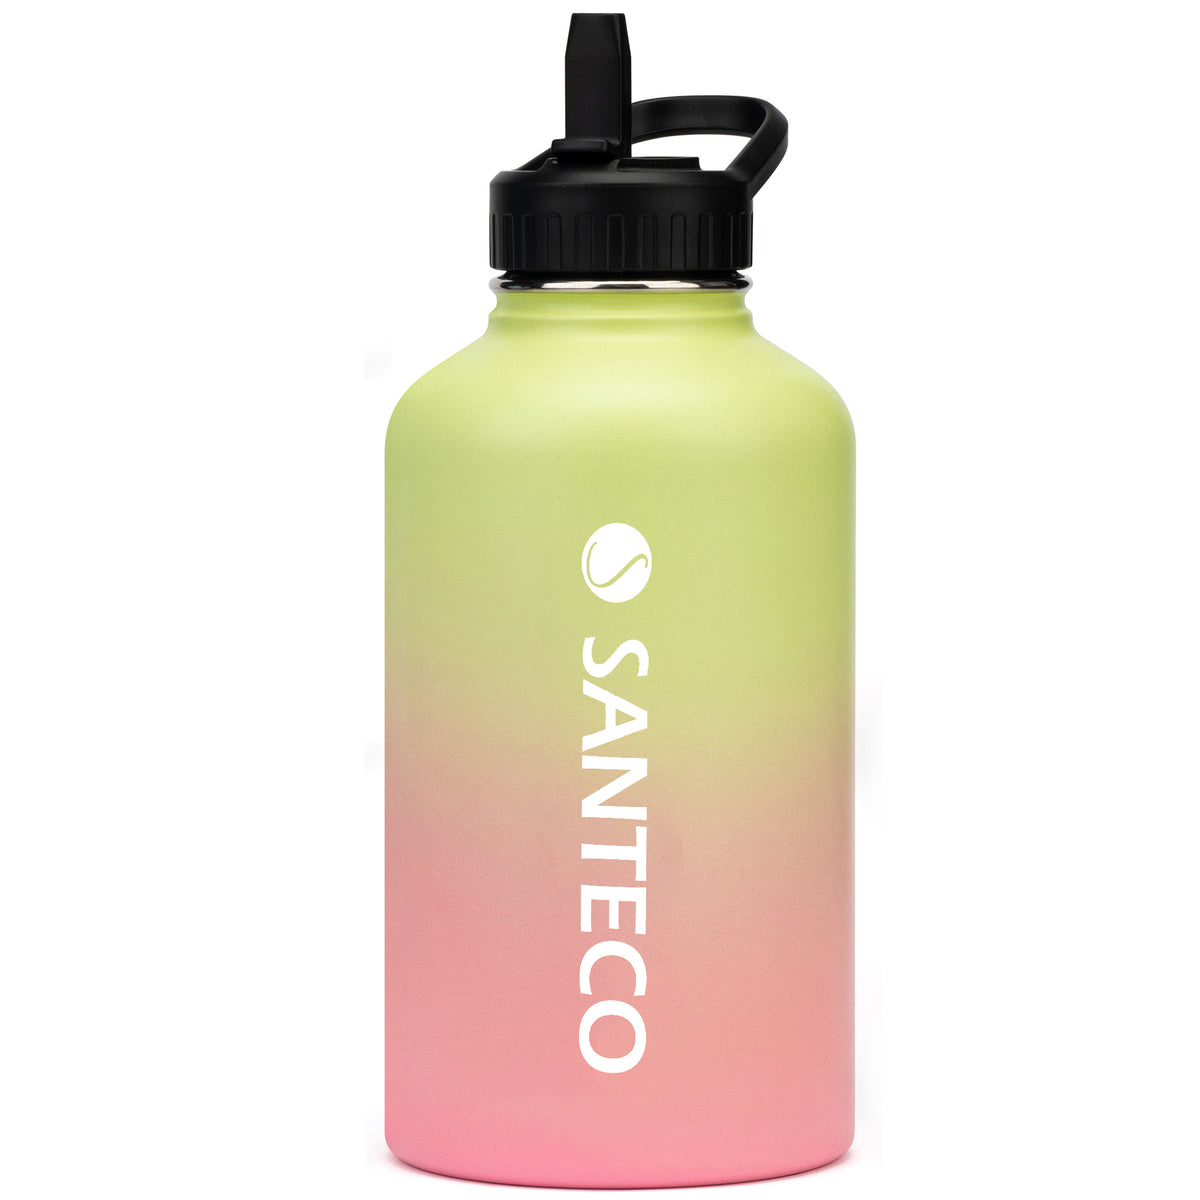 SANTECO Water Bottles, 32 oz Reusable Wide Mouth Sports Bottle, Easy to  Clean BPA Free Tritan, Double Wall Insulated Light Weight Bottles with  Handle